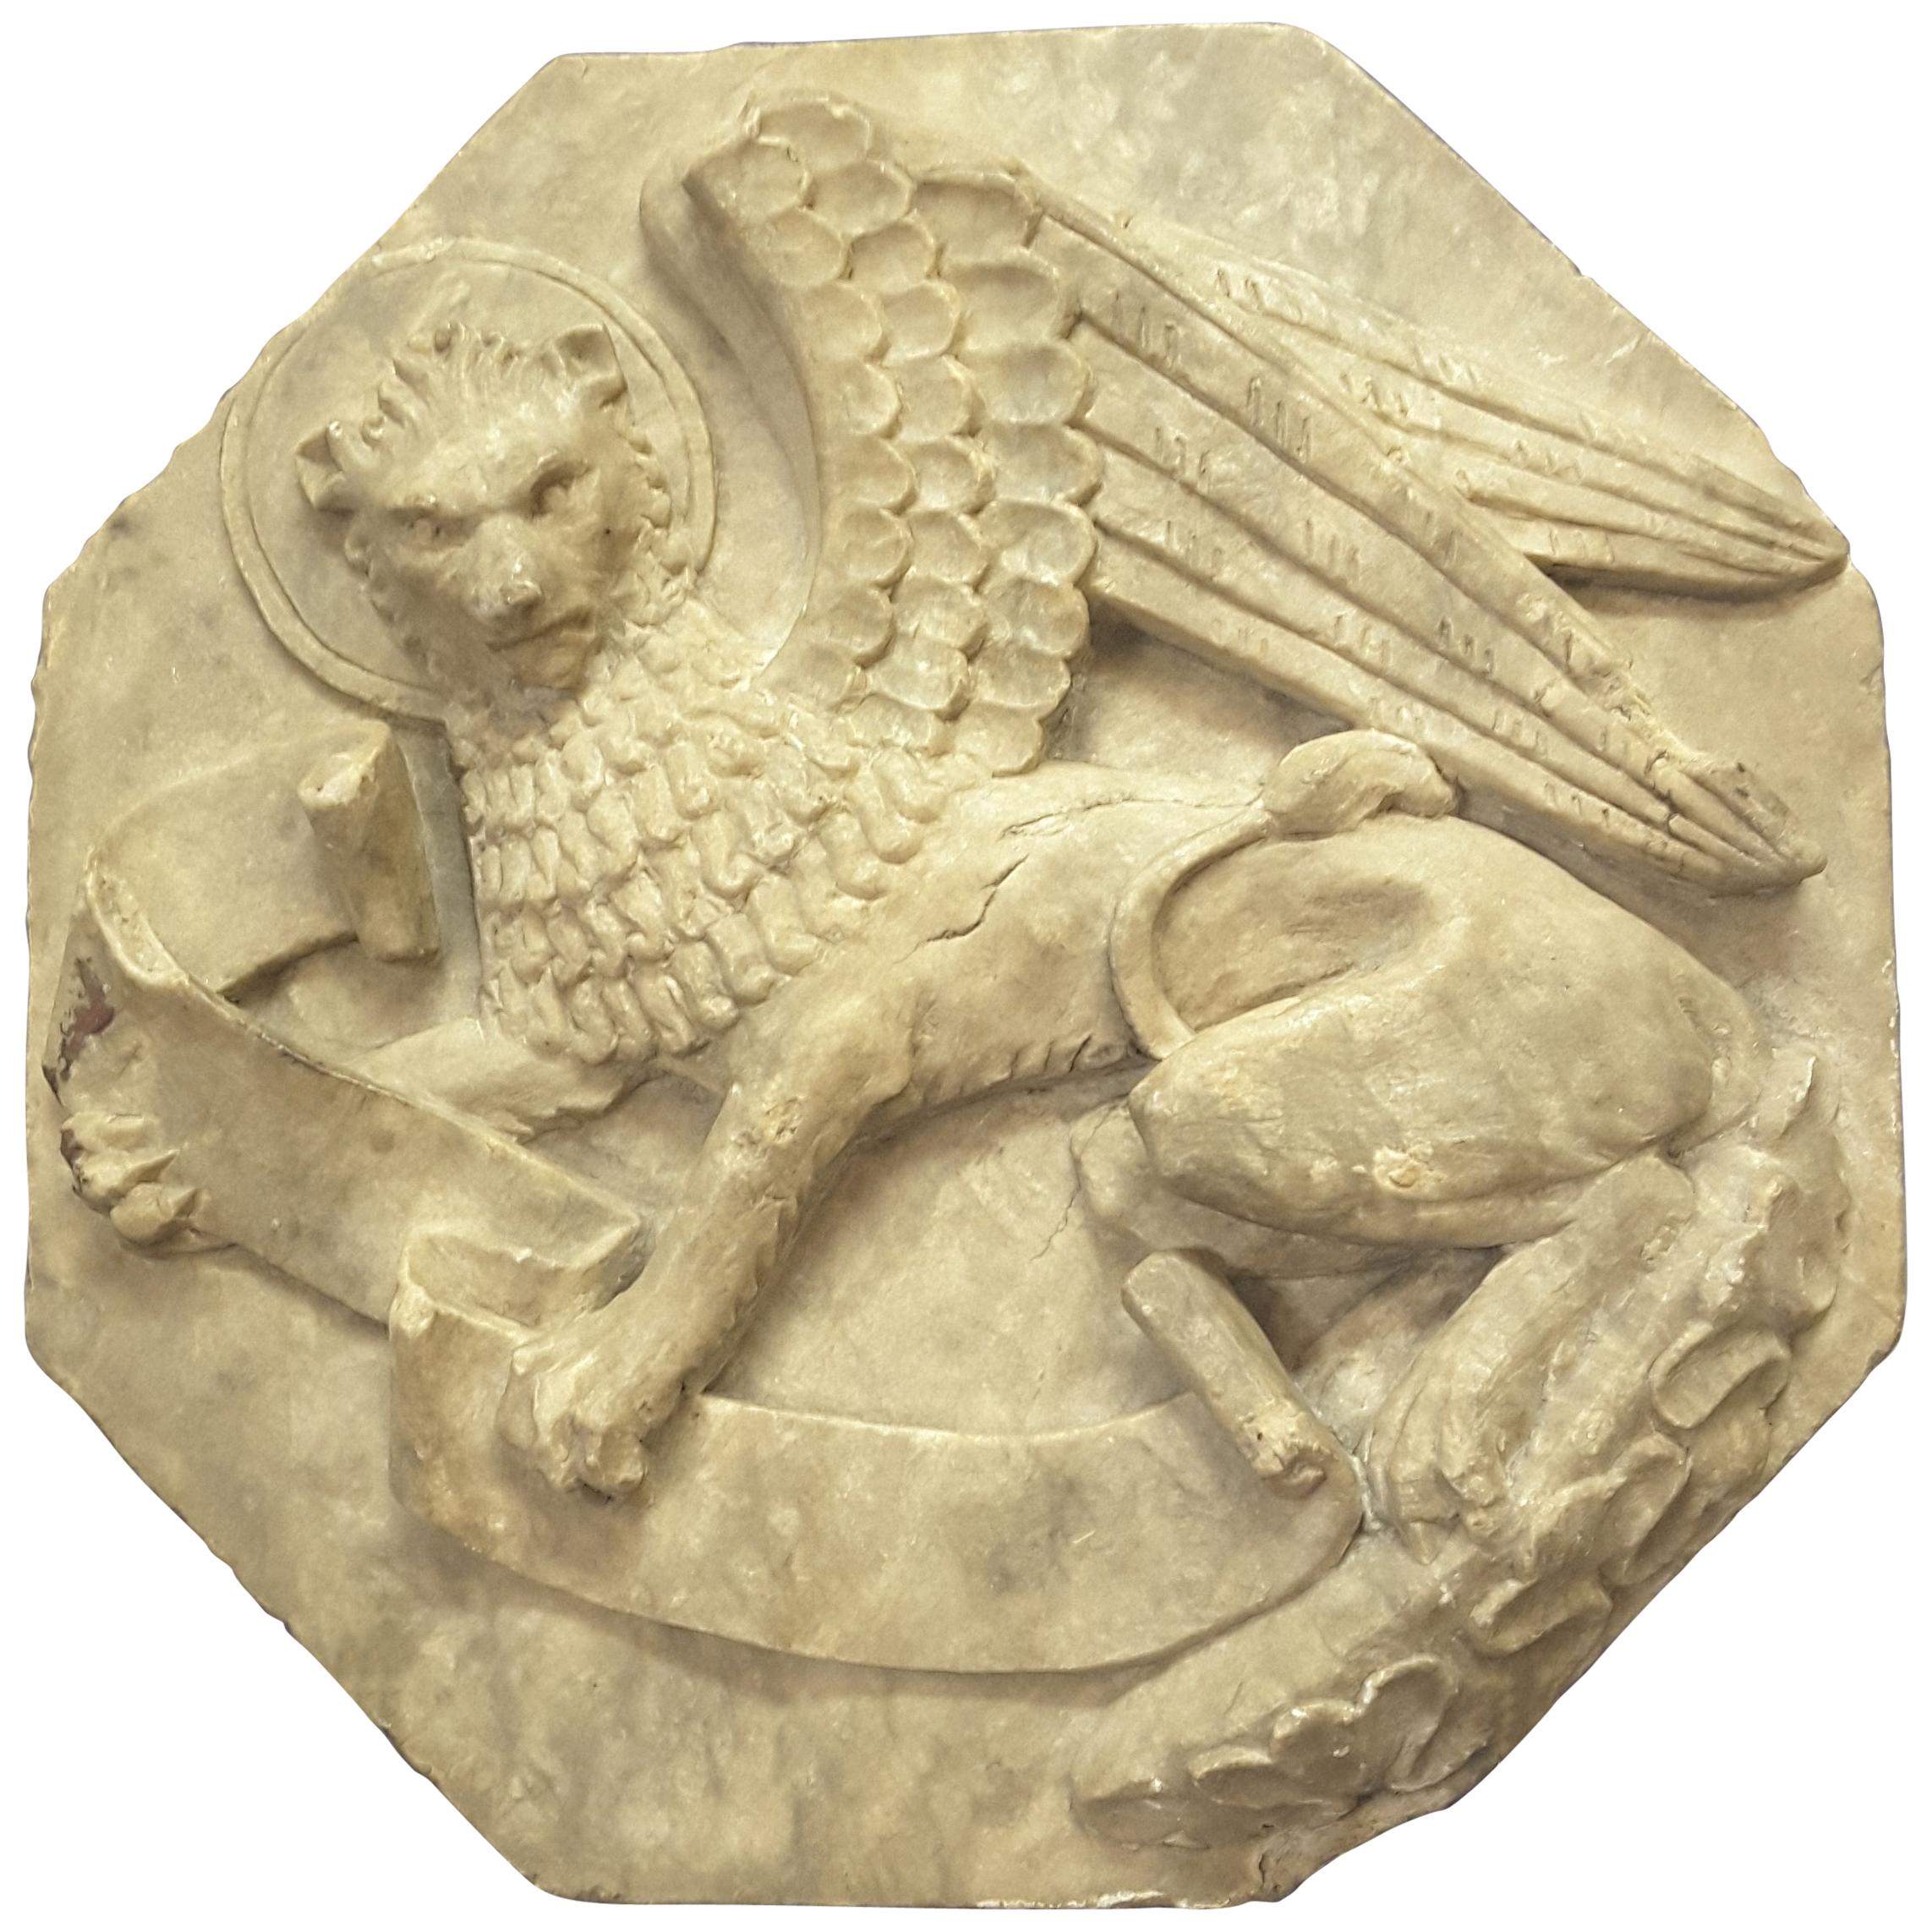 Majestic Winged Lion Building Fragment, Birmingham, Late 18th-Early 19th Century